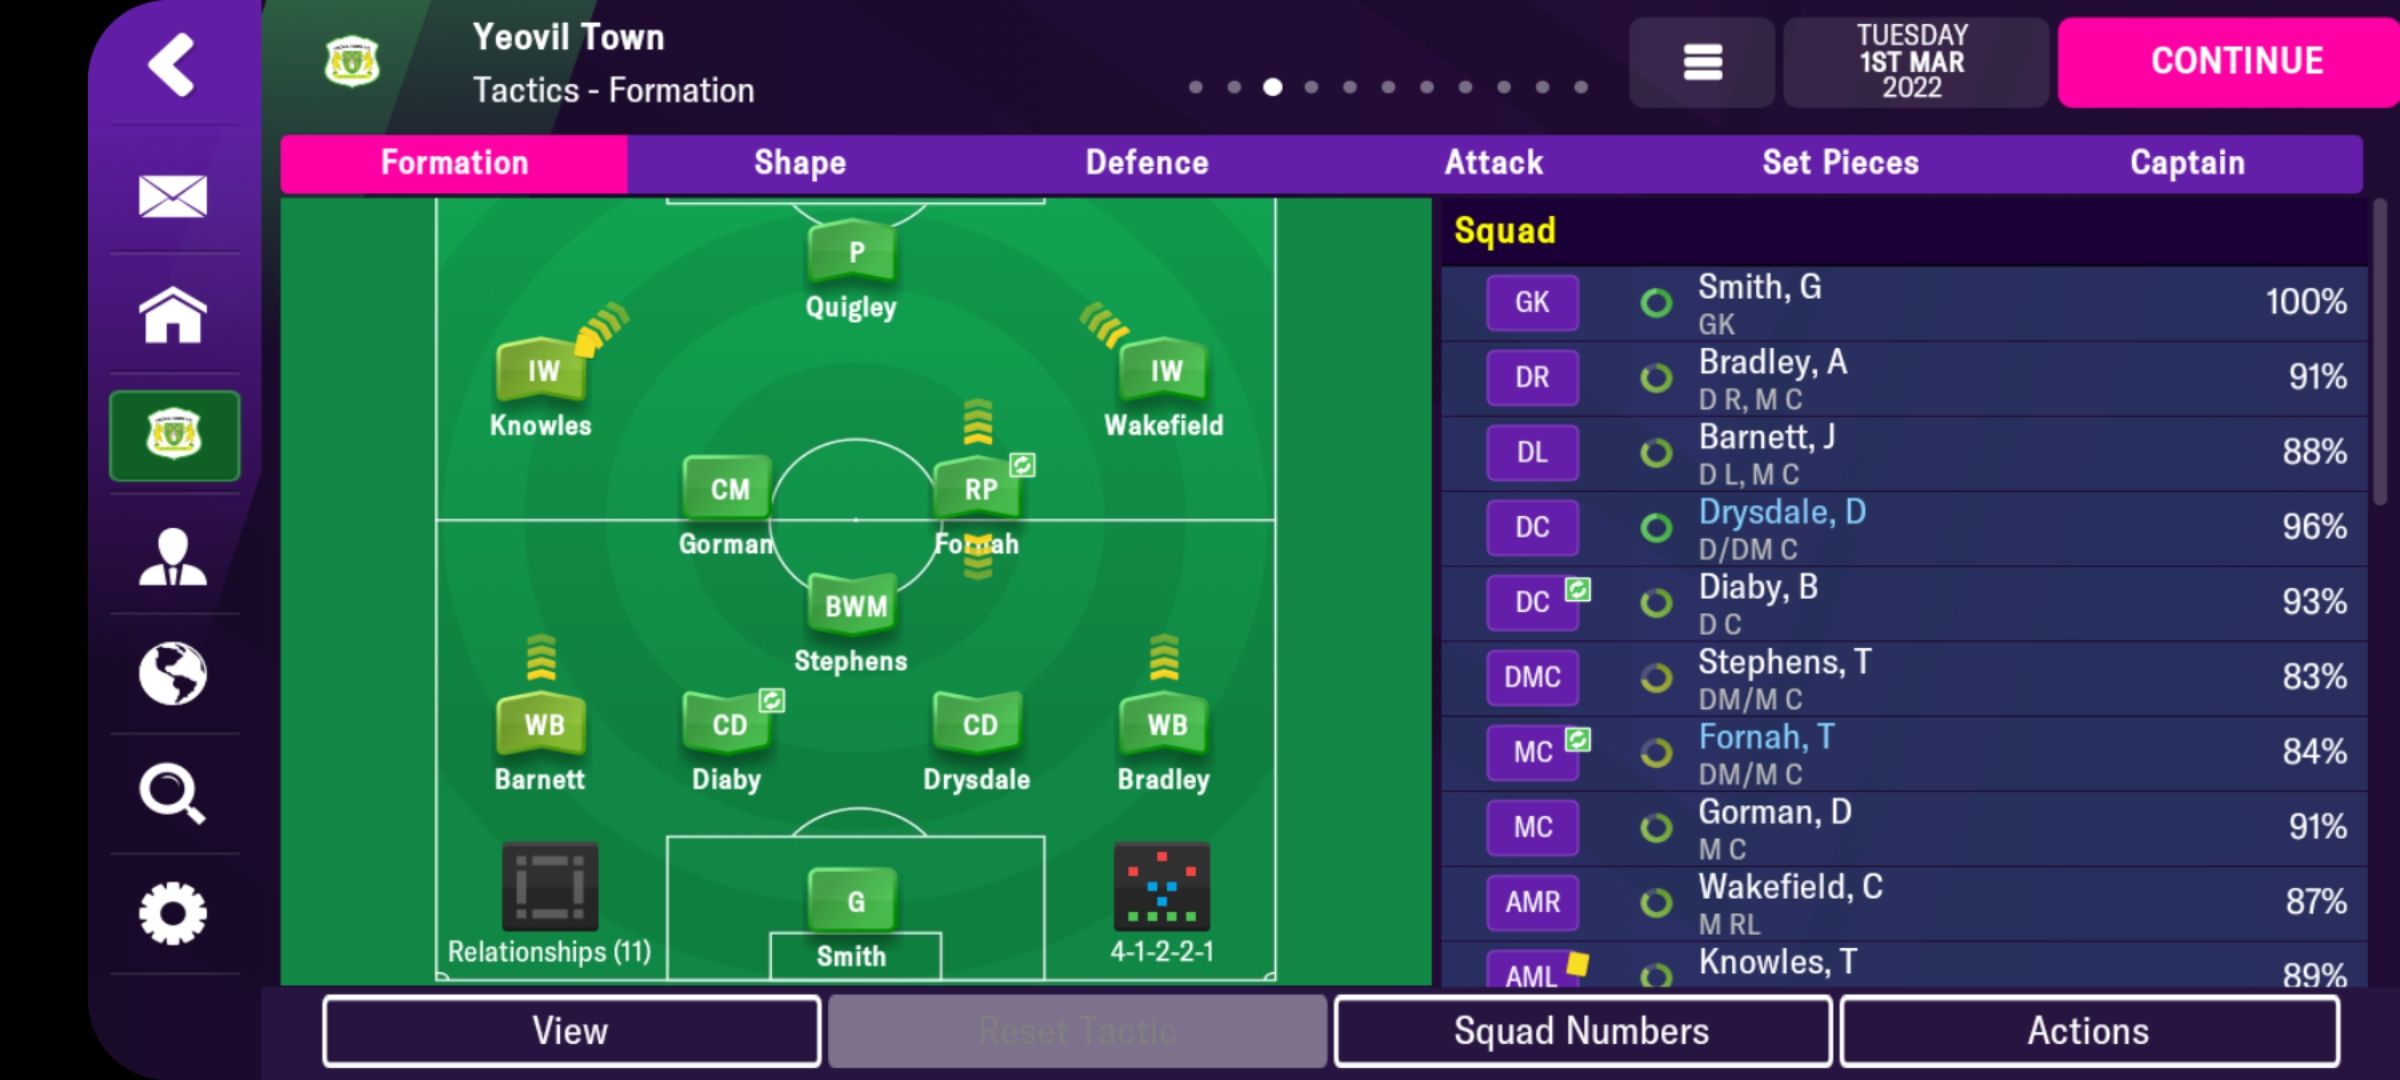 Football Manager 2022 Mobile - FMM Vibe